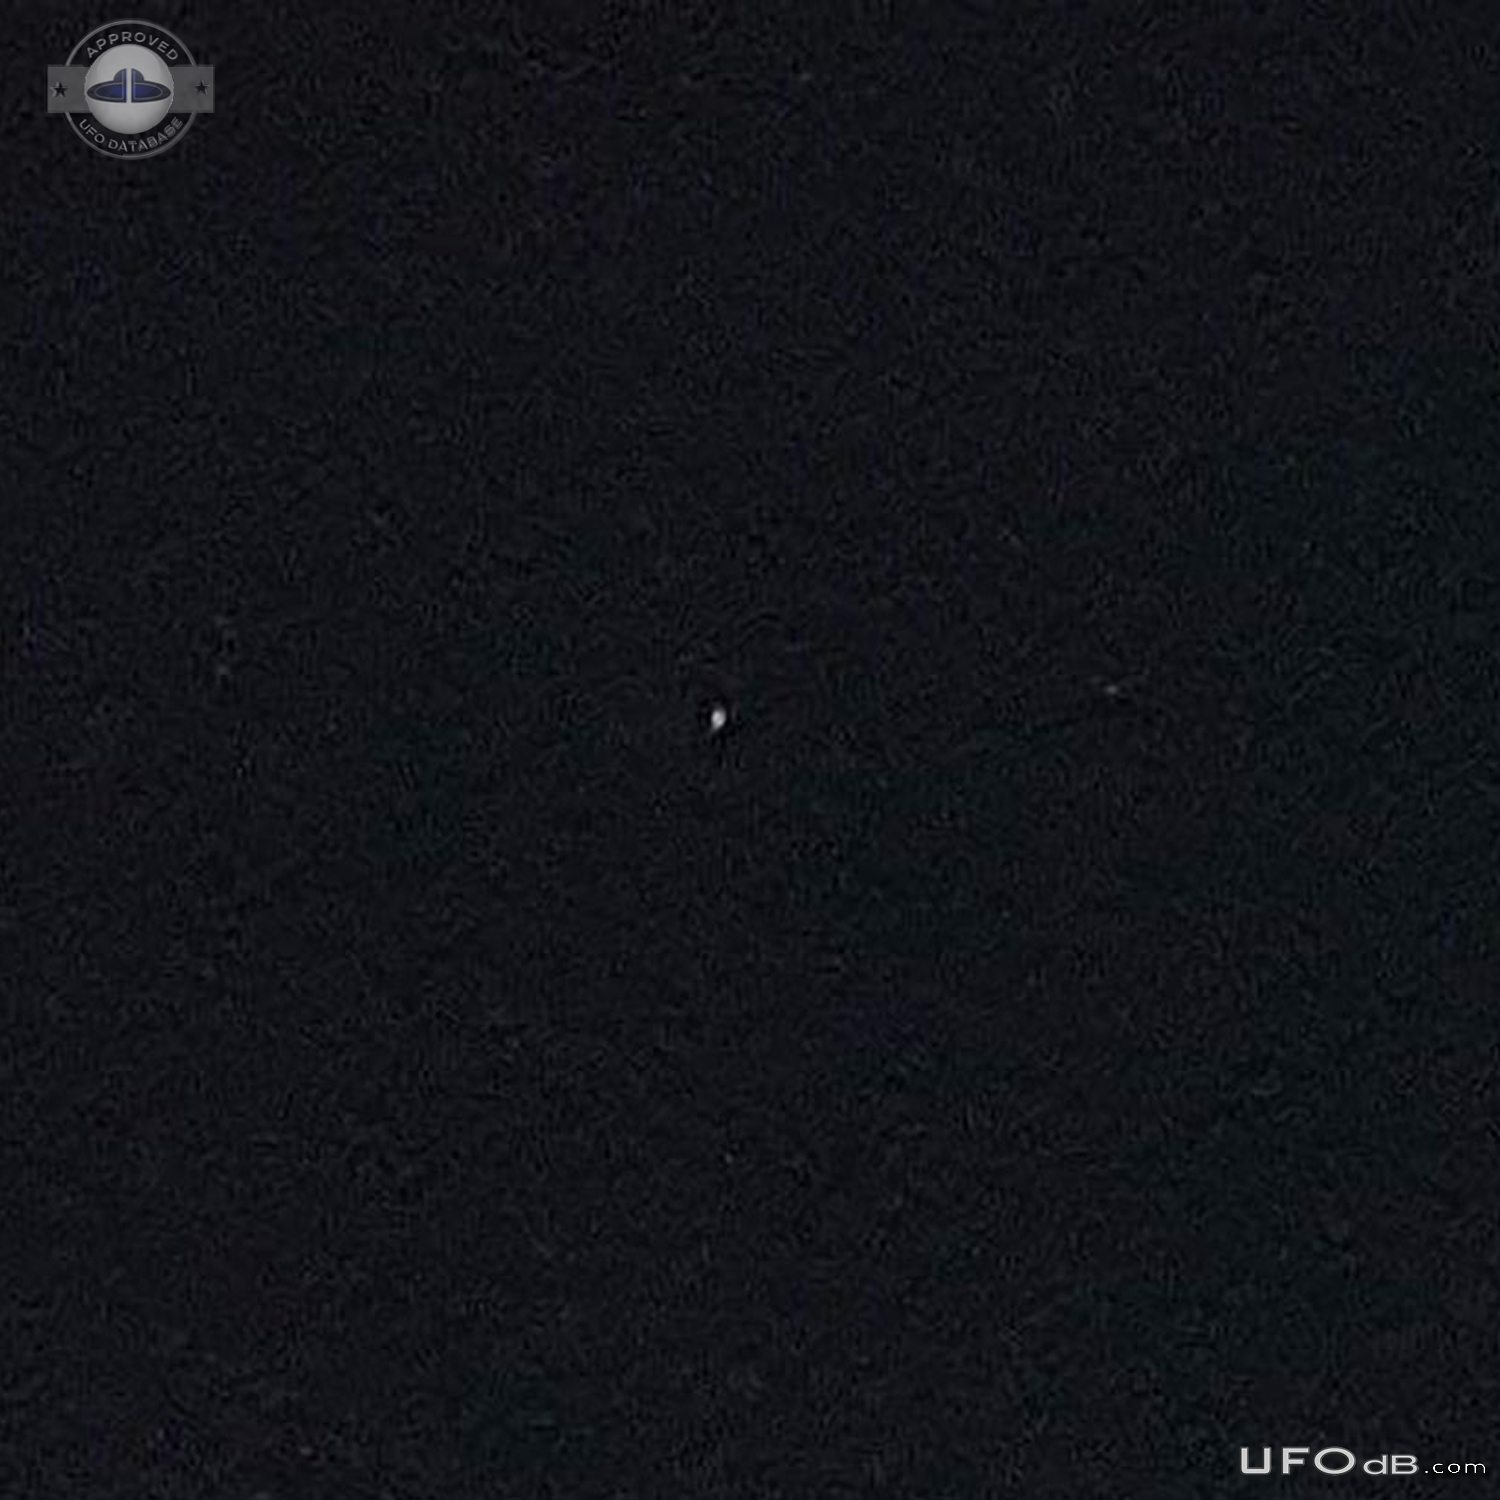 Bright UFO moved fast - like a star but moved - Tucson Arizona USA 201 UFO Picture #798-3